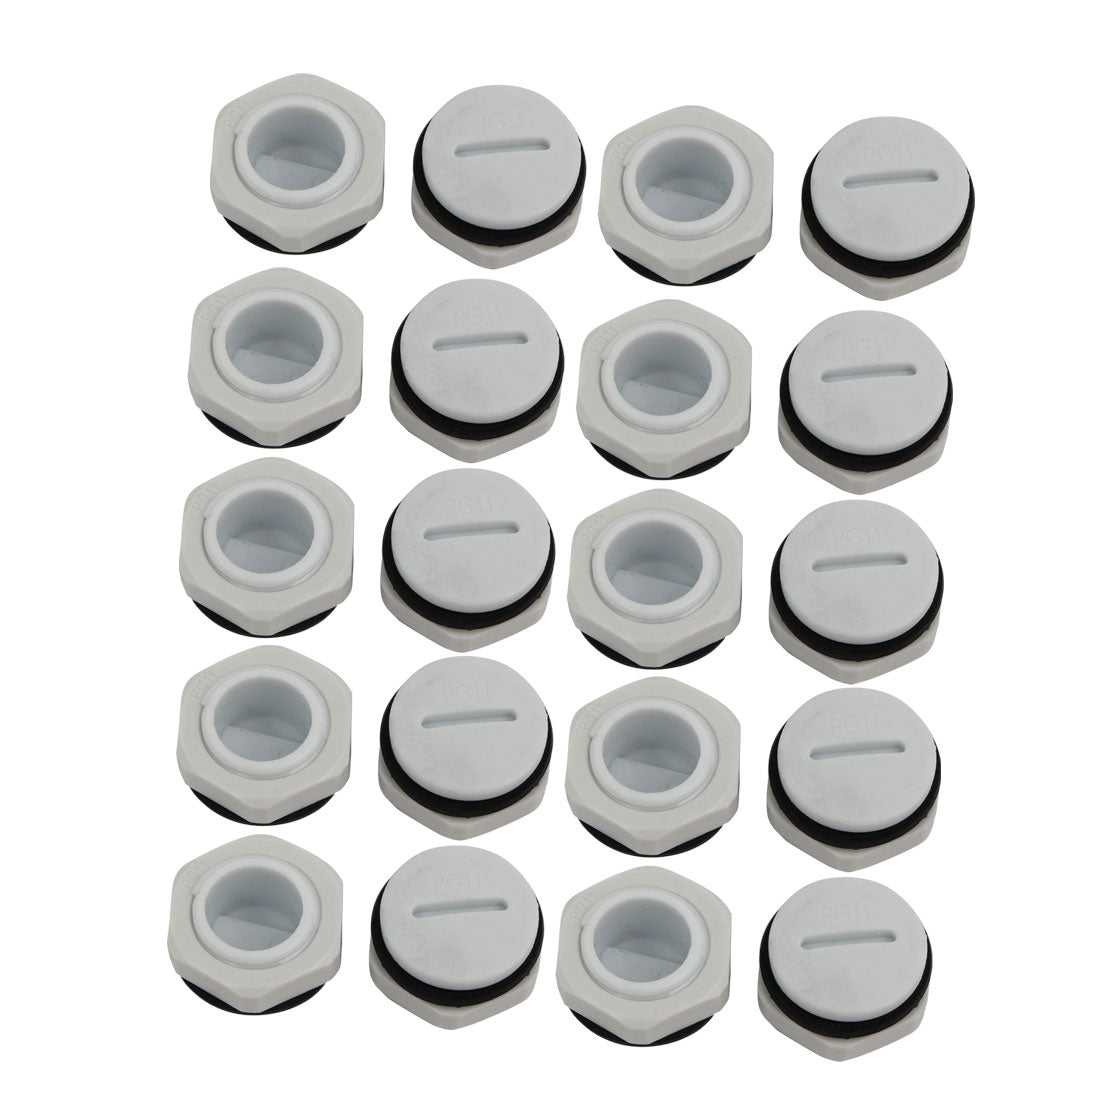 uxcell Uxcell 20pcs GLW-PG11 Nylon Threaded Cable Gland Cap Round Screw-in Cover Gray w Washer